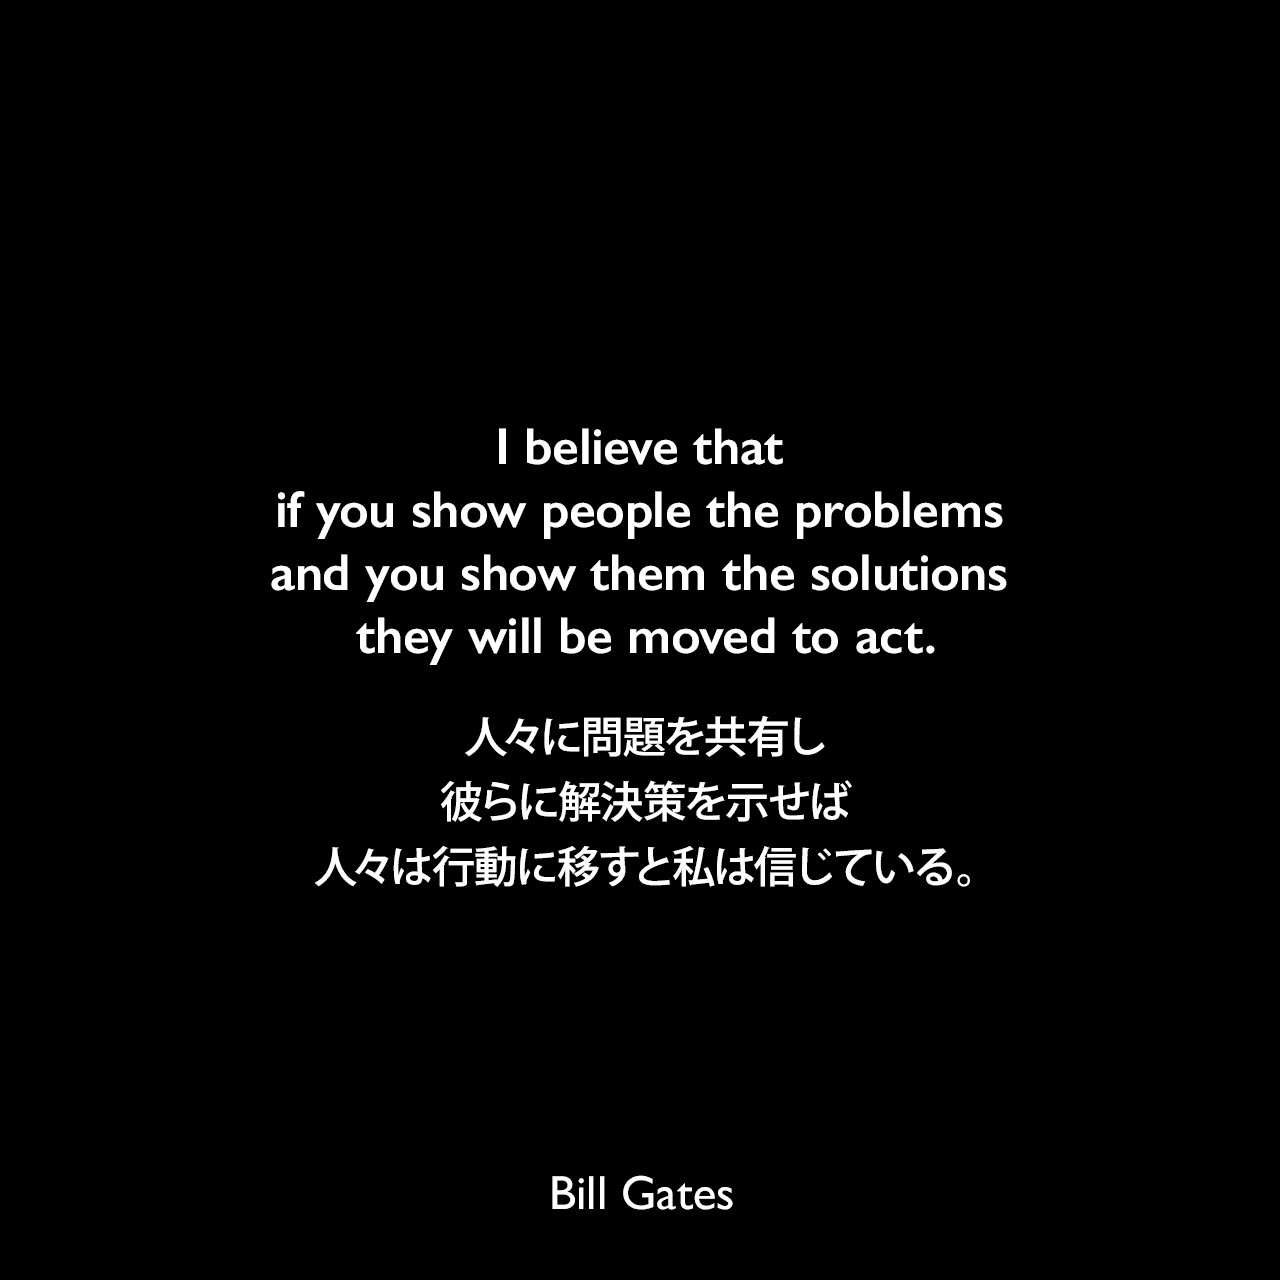 I believe that if you show people the problems and you show them the solutions they will be moved to act.人々に問題を共有し、彼らに解決策を示せば、人々は行動に移すと私は信じている。Bill Gates